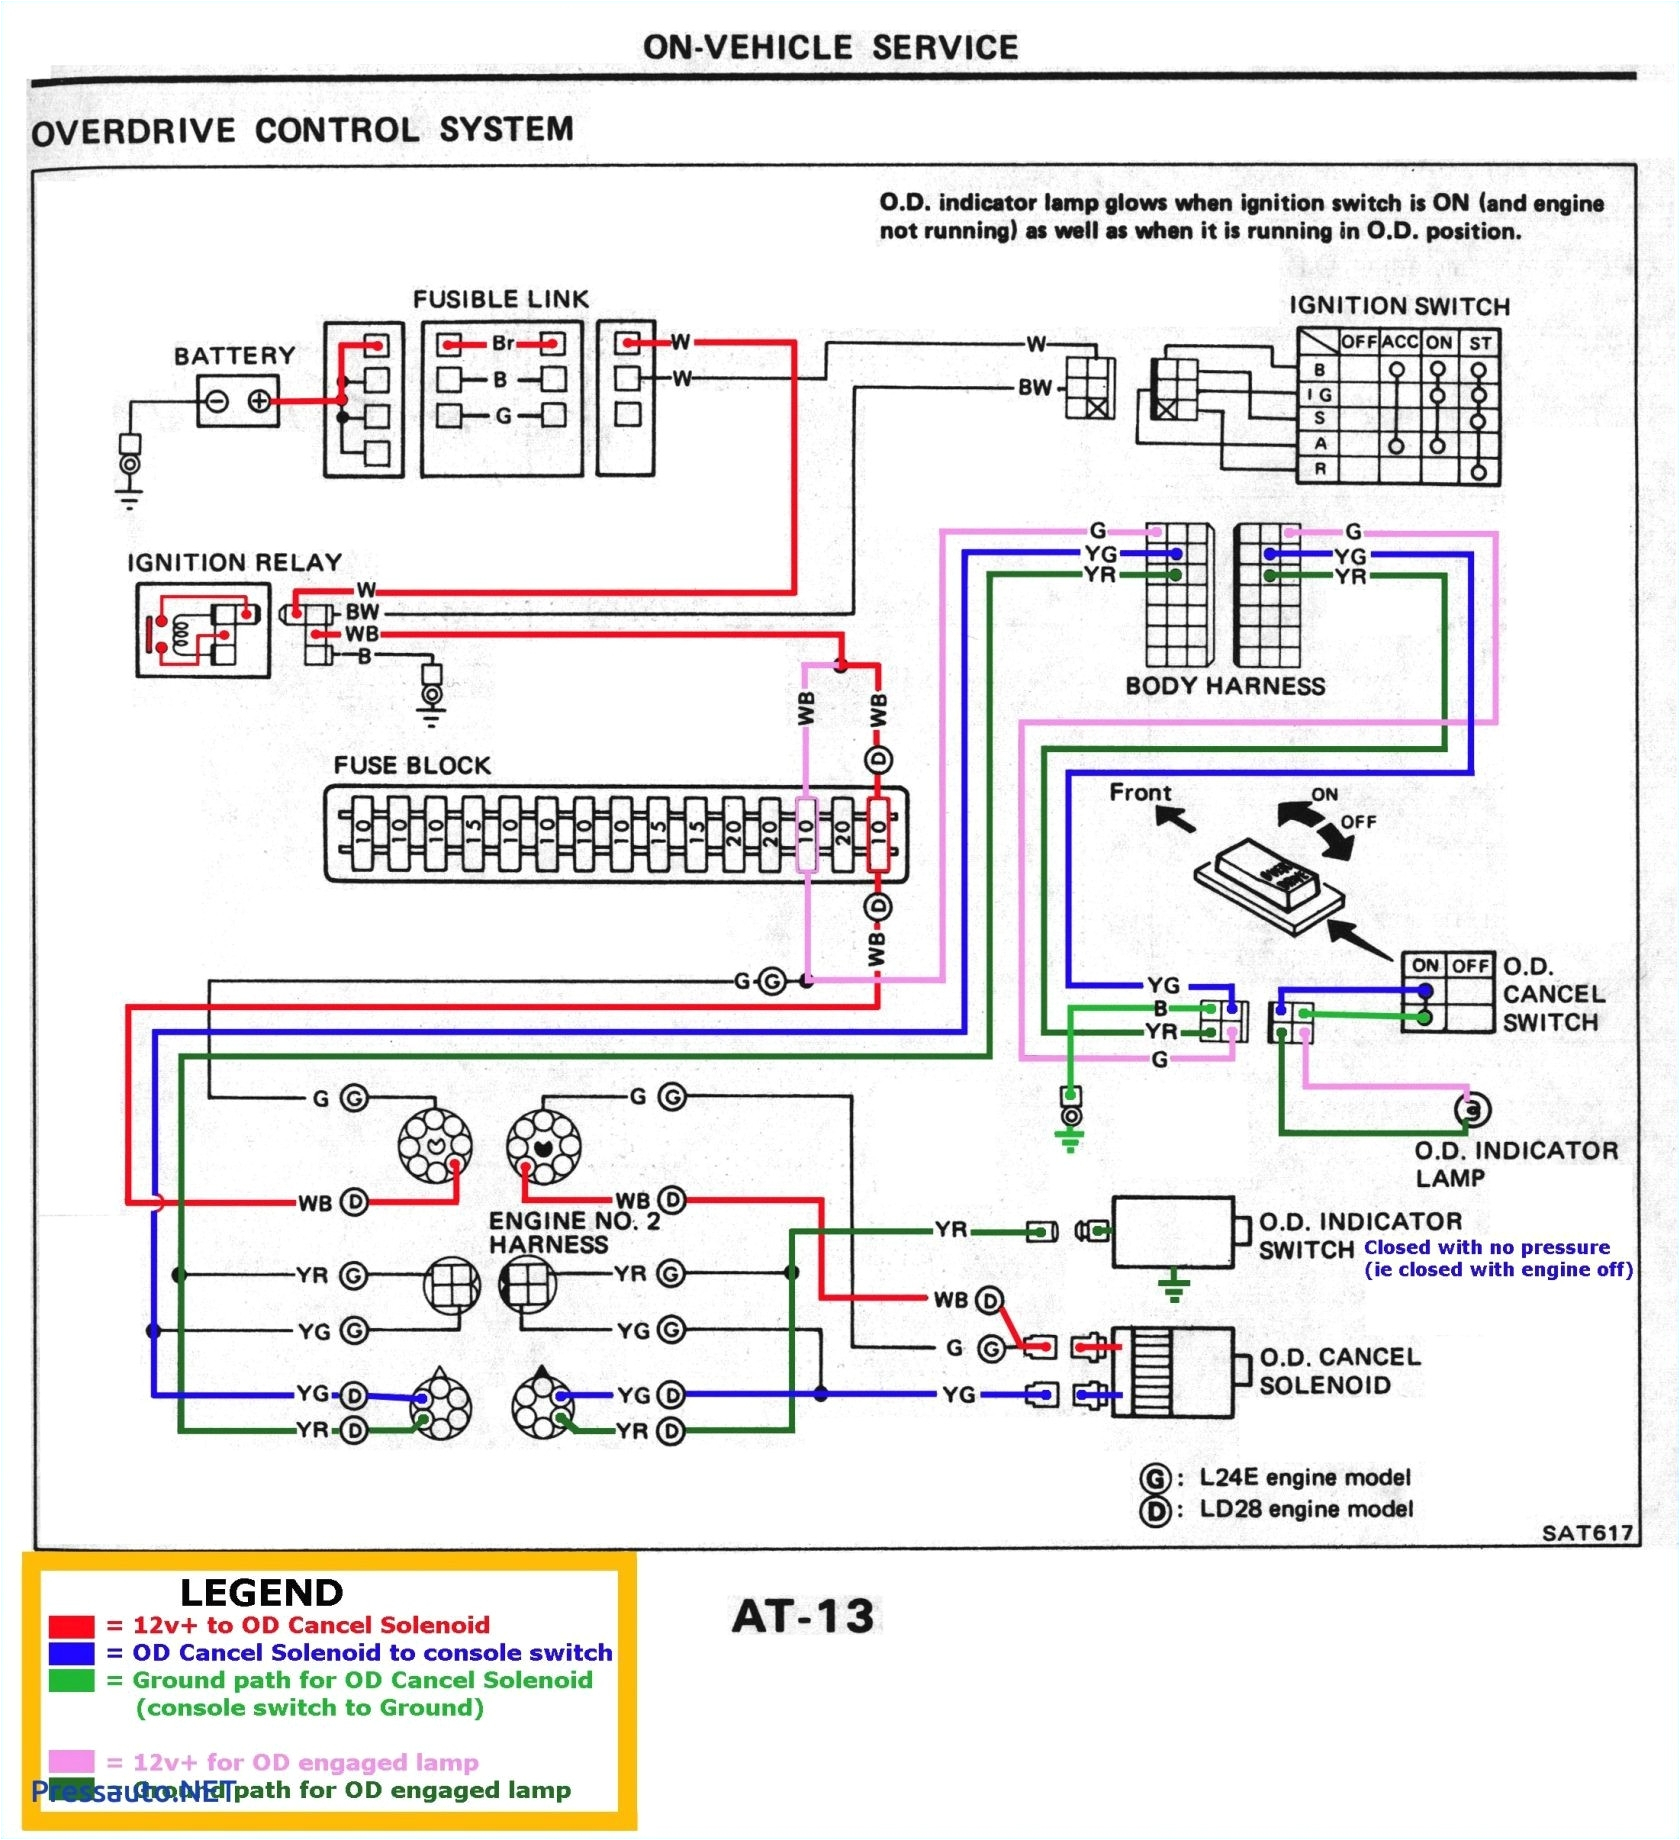 1680x1840 wiring diagram for murray riding lawn mower solenoid free wiring riding lawn mower drawing